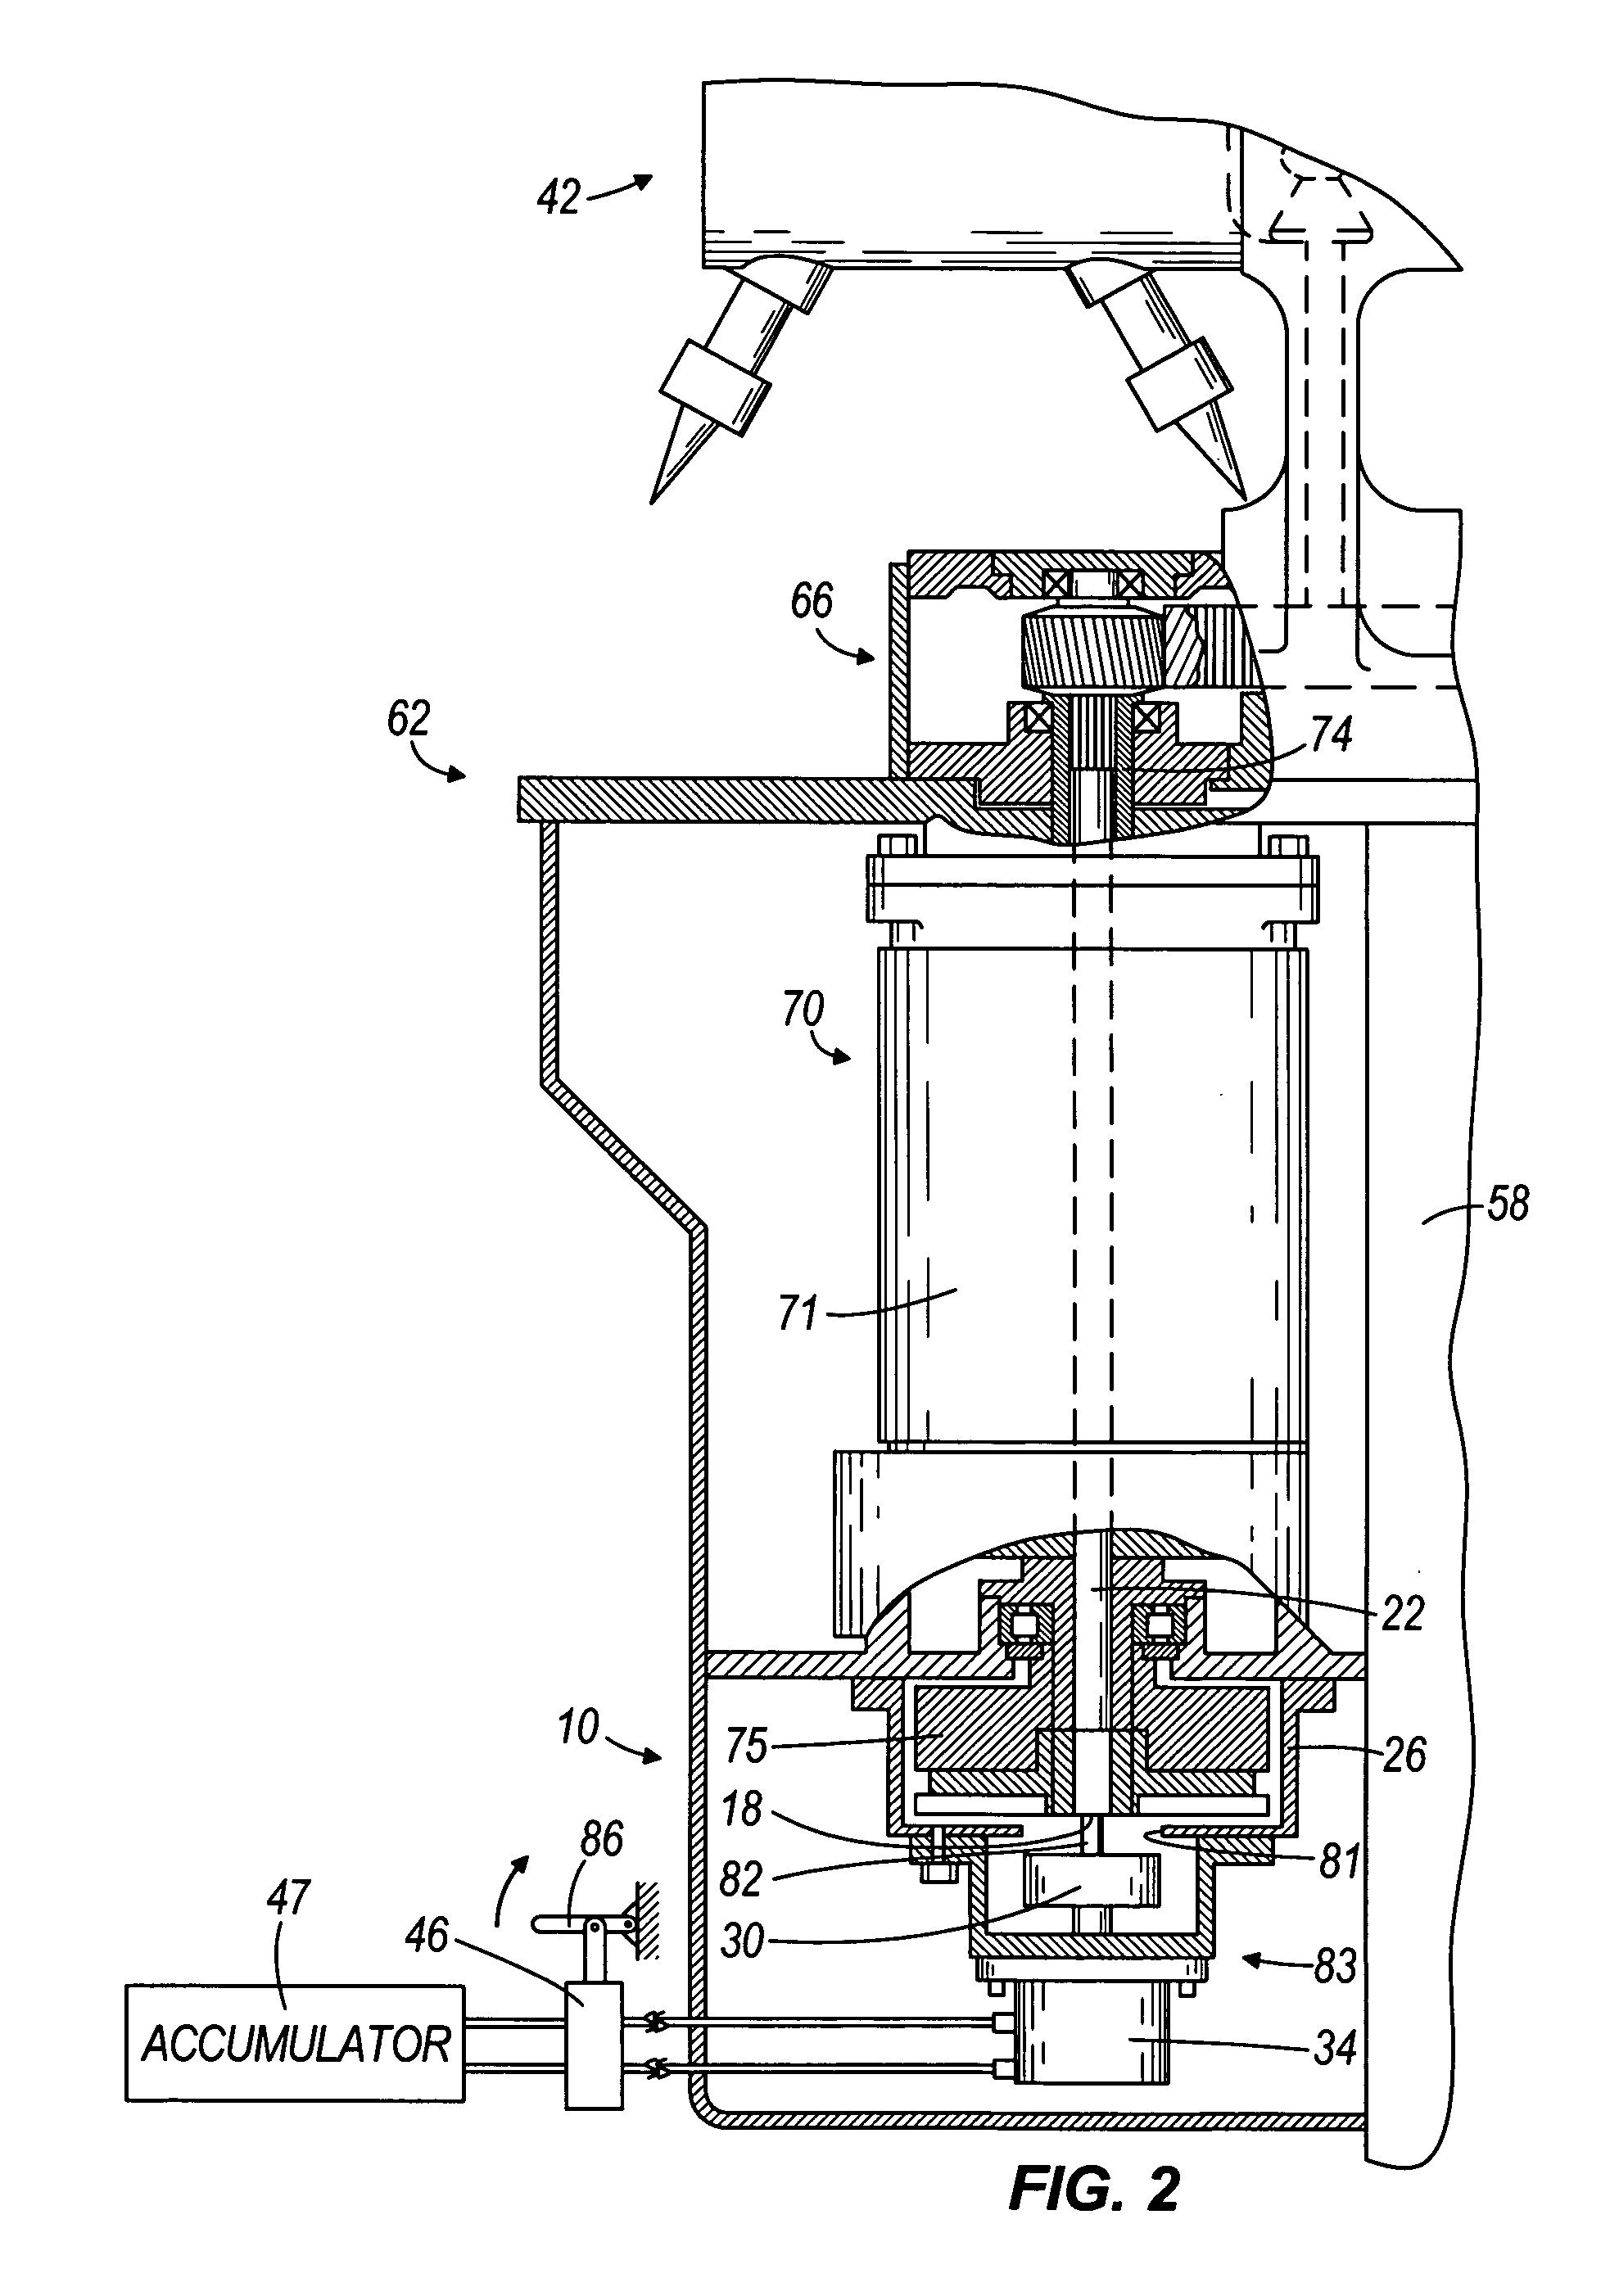 Drum turning mechanism for continuous miners and longwall shearers